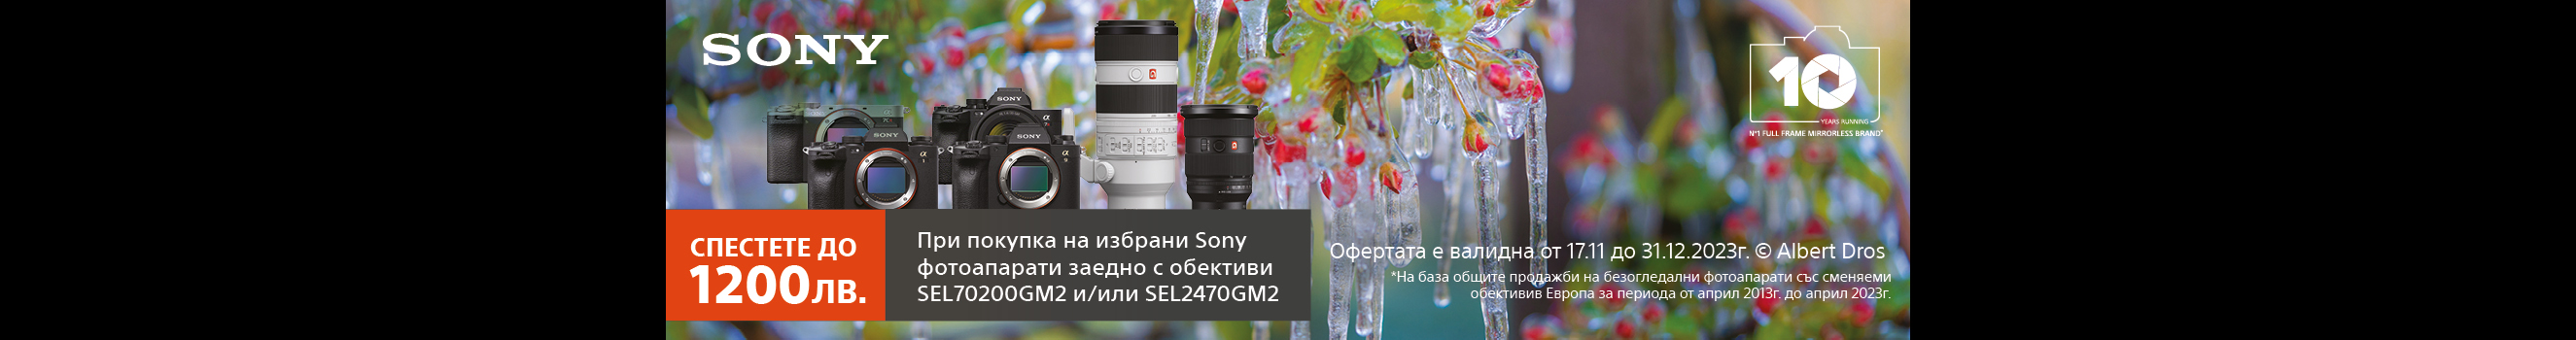  1,200 when buying Sony selected cameras in sets with Sony FE 70-200mm f/2.8 GM OSS II lens and Sony FE 24-70mm f/2.8 GM II lensuntil 31.12.2023